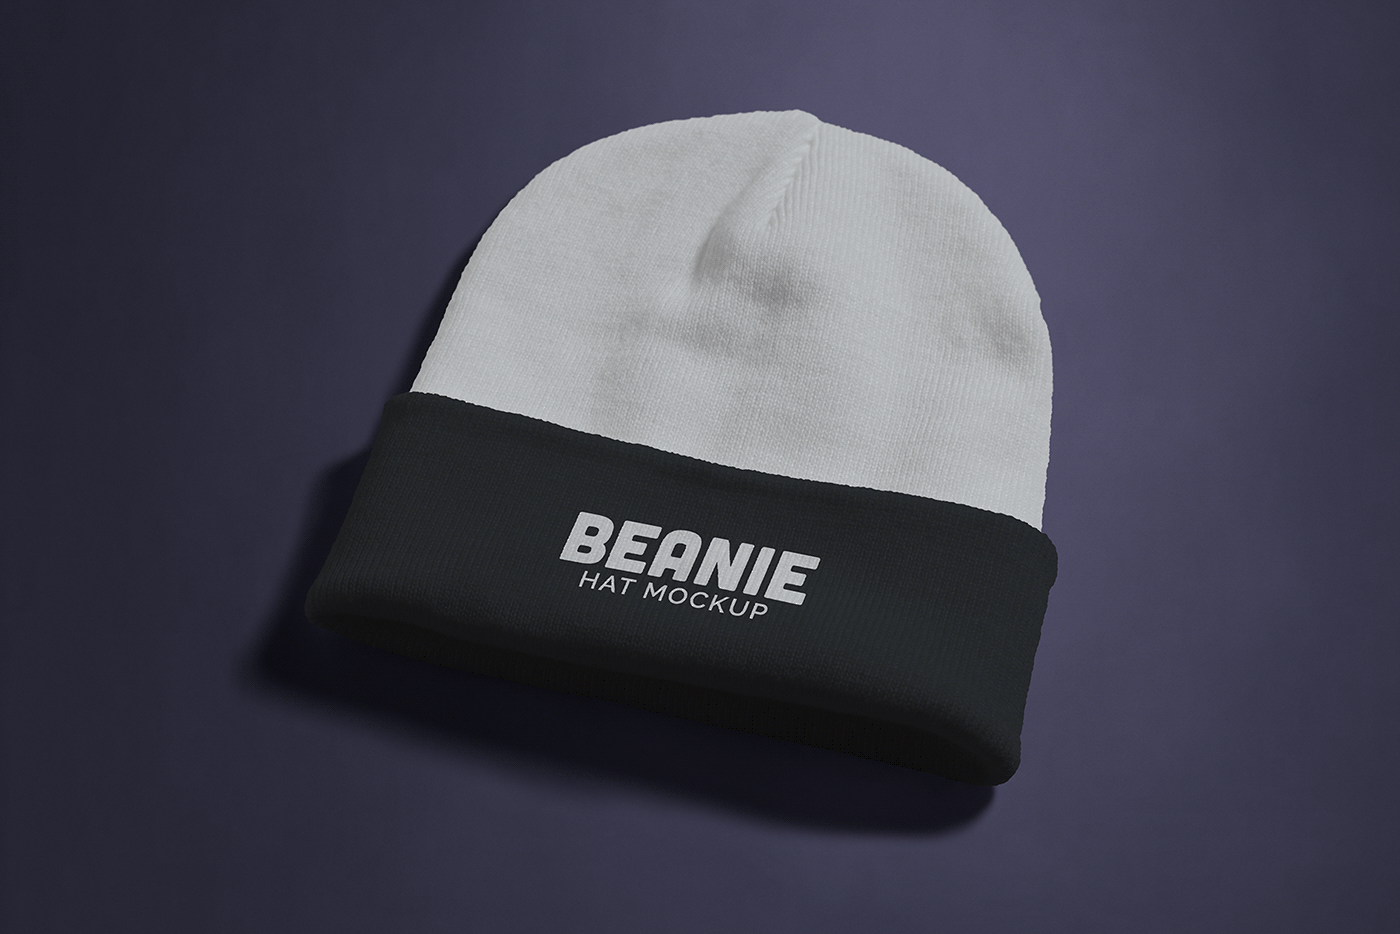 beanie cap clothes Clothing hat head headwear knitted Mockup outfit